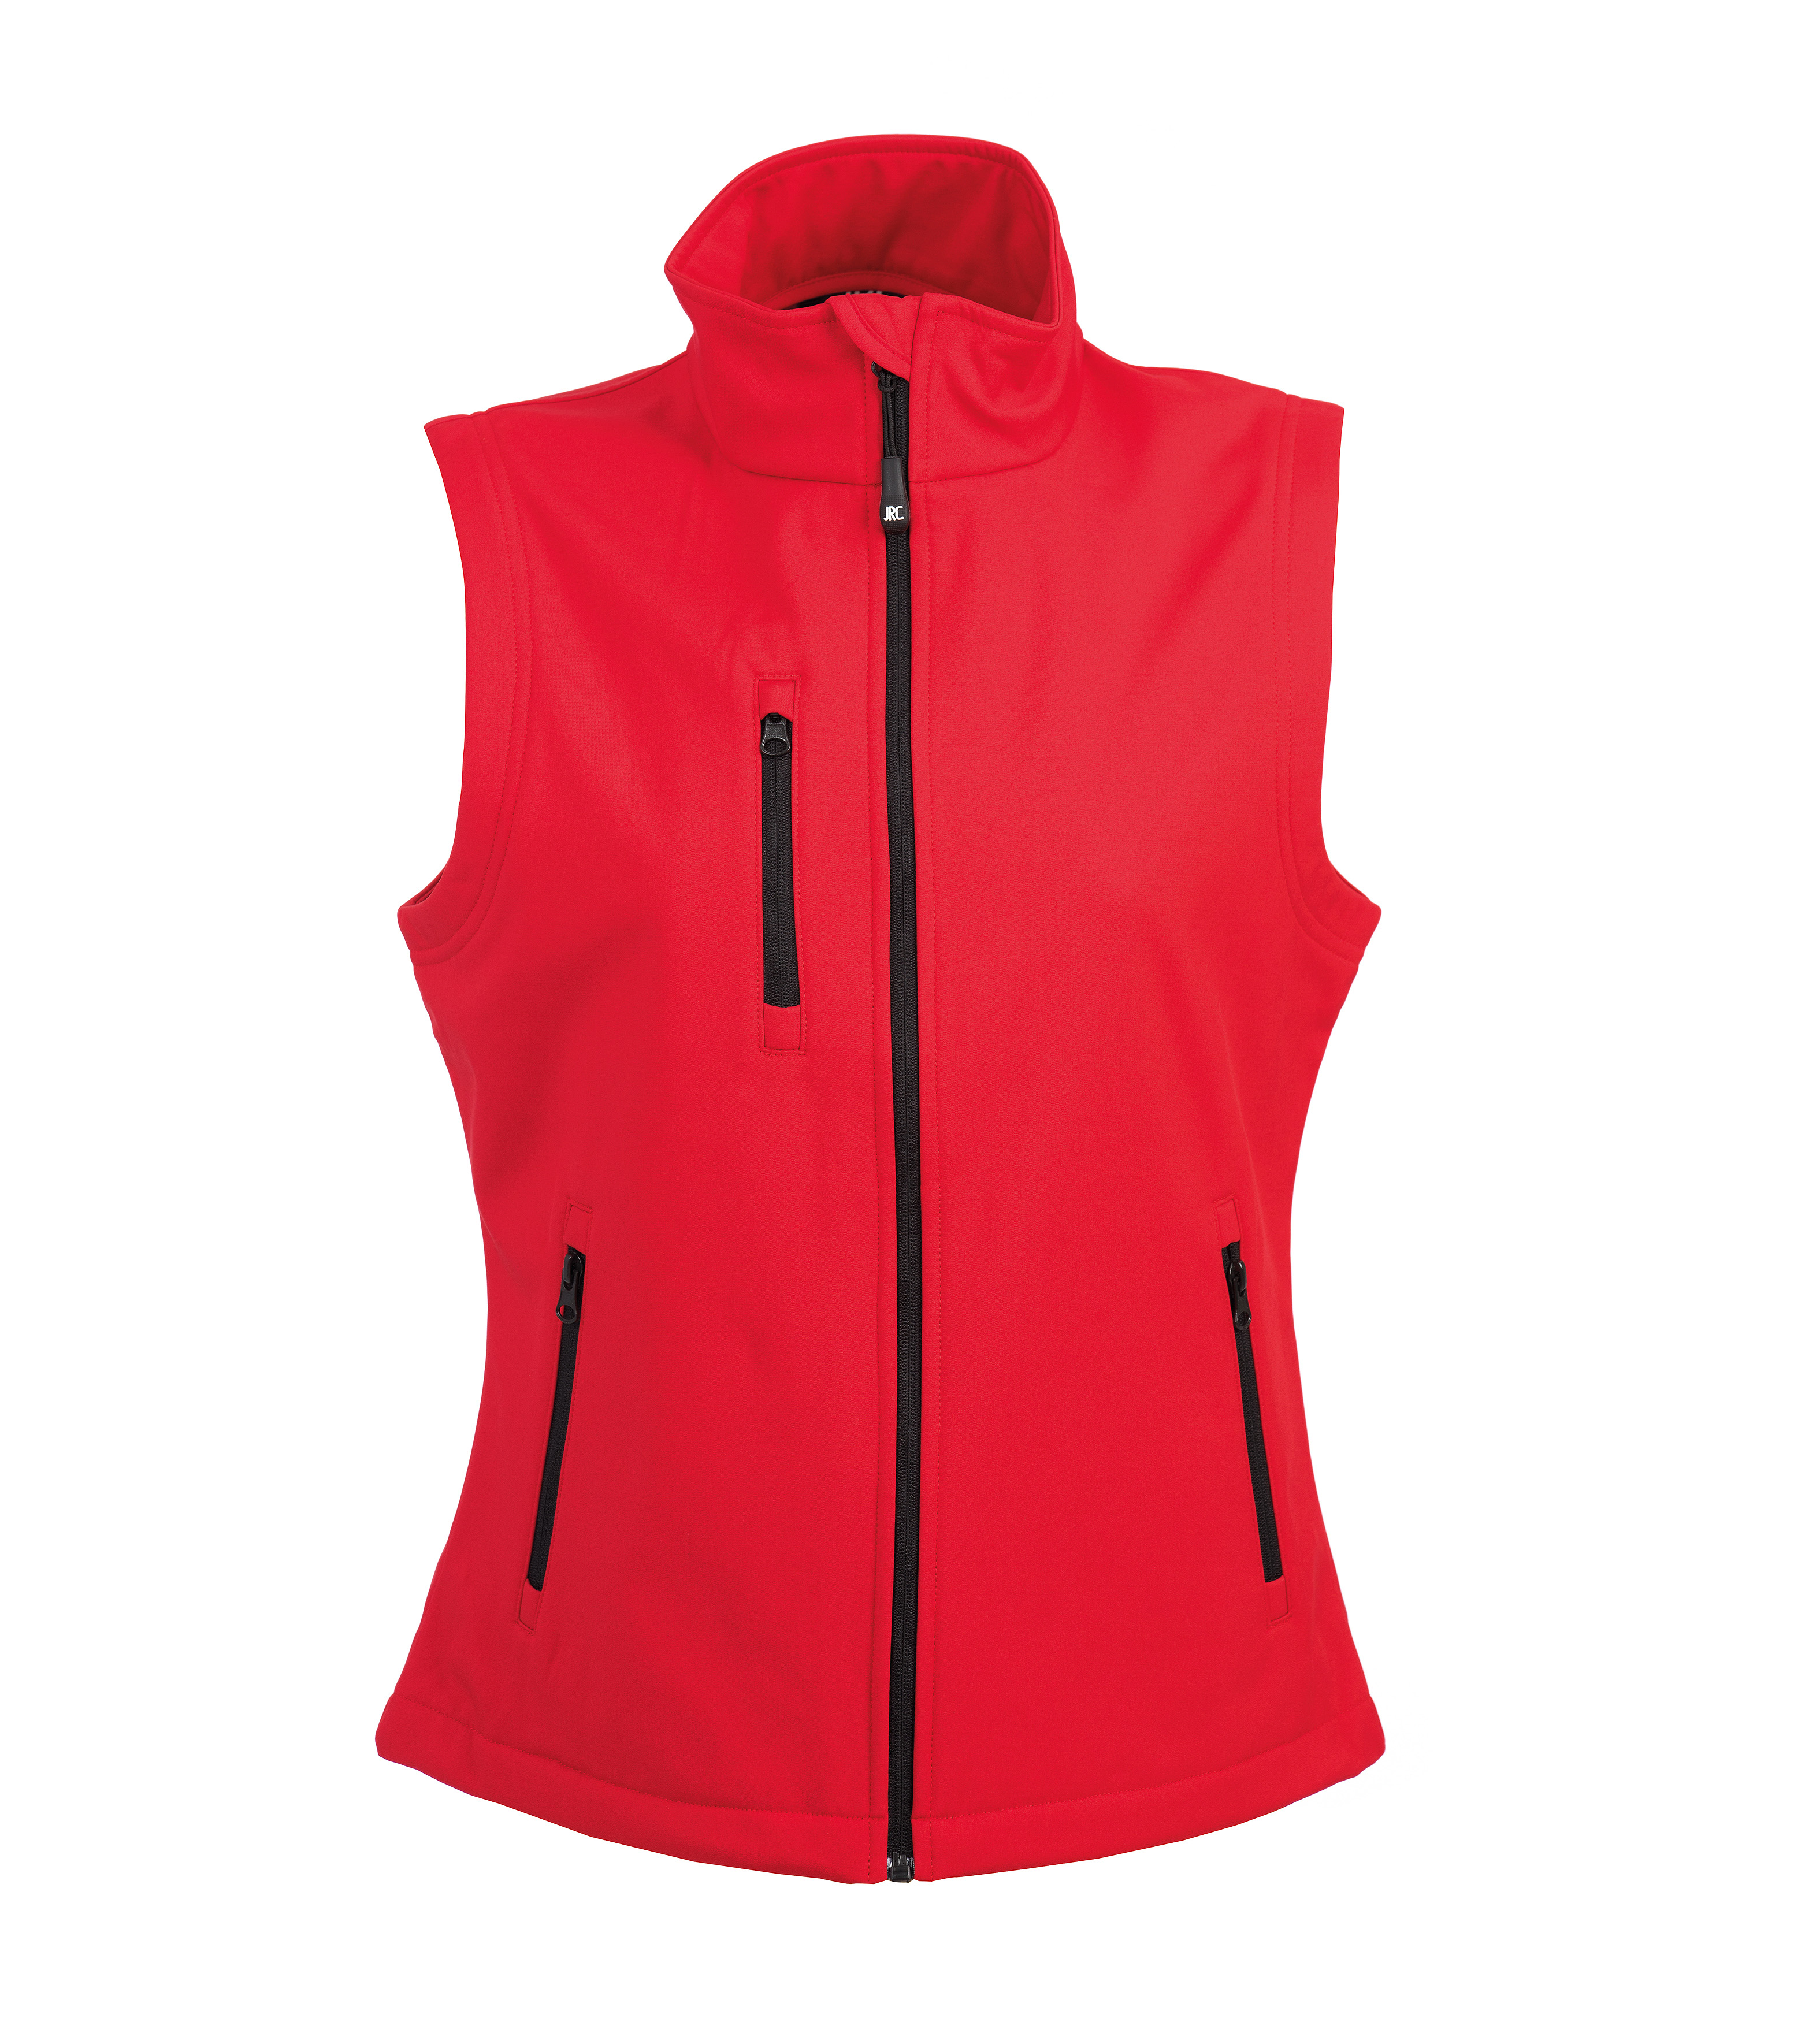 Gilet Tarvisio Lady (variante colore: red)